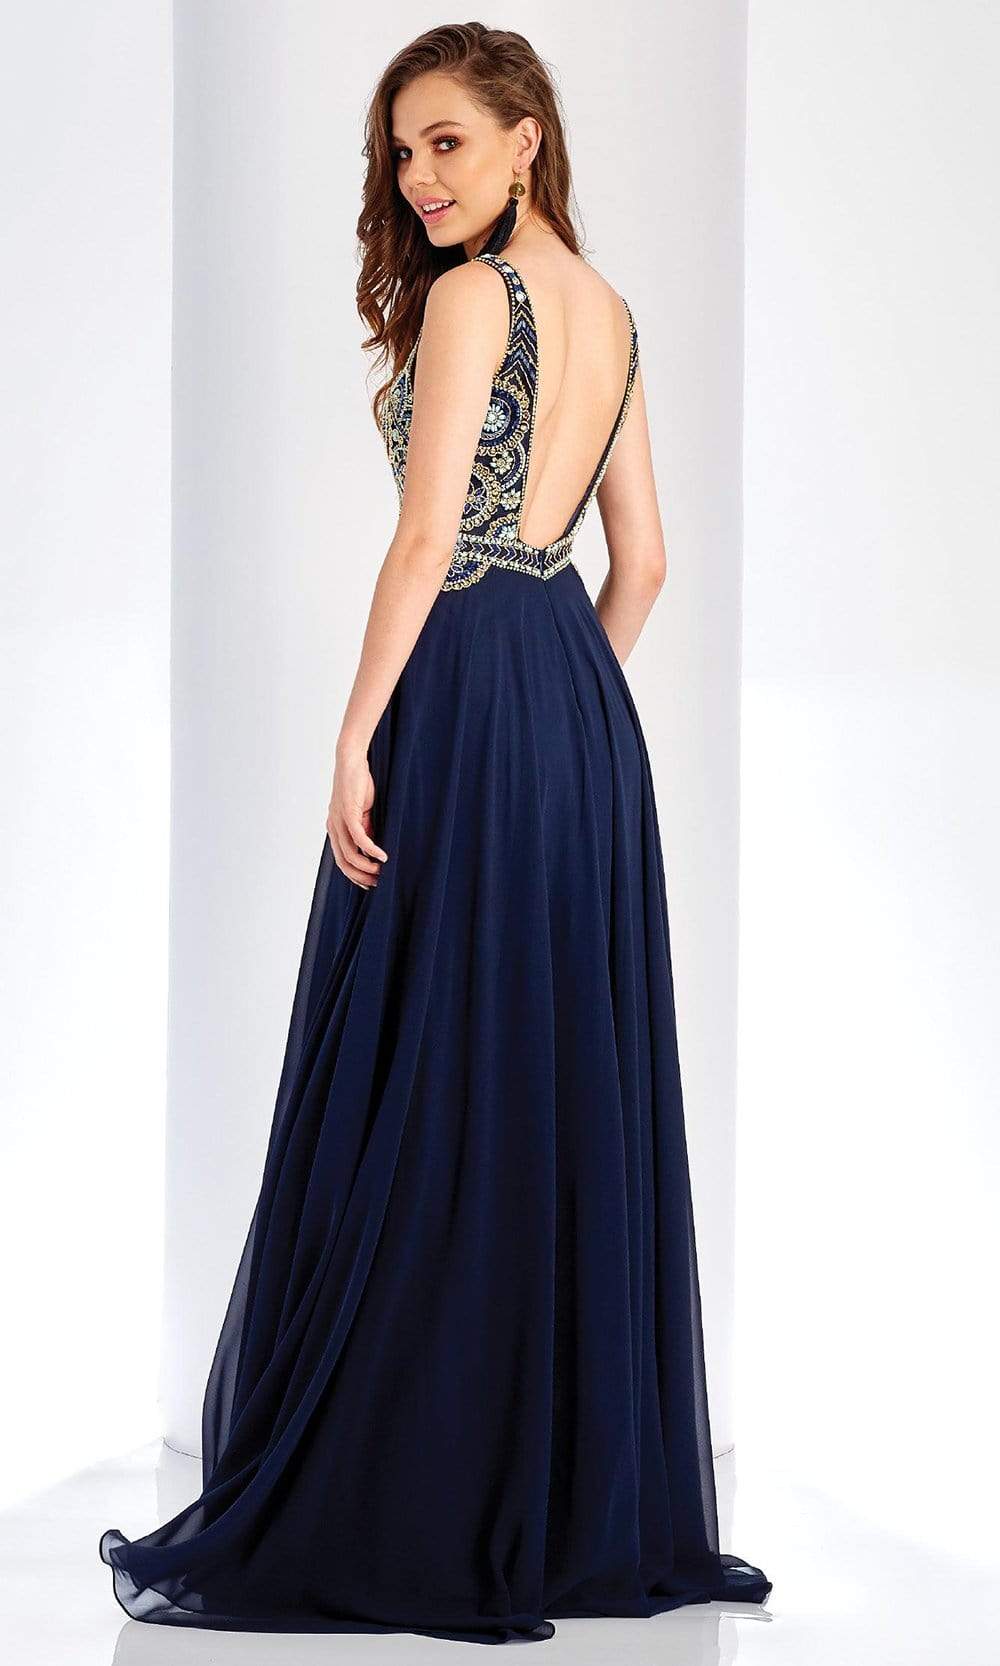 Clarisse - 4924 Deep V-Neck Beaded Chiffon Gown Special Occasion Dress